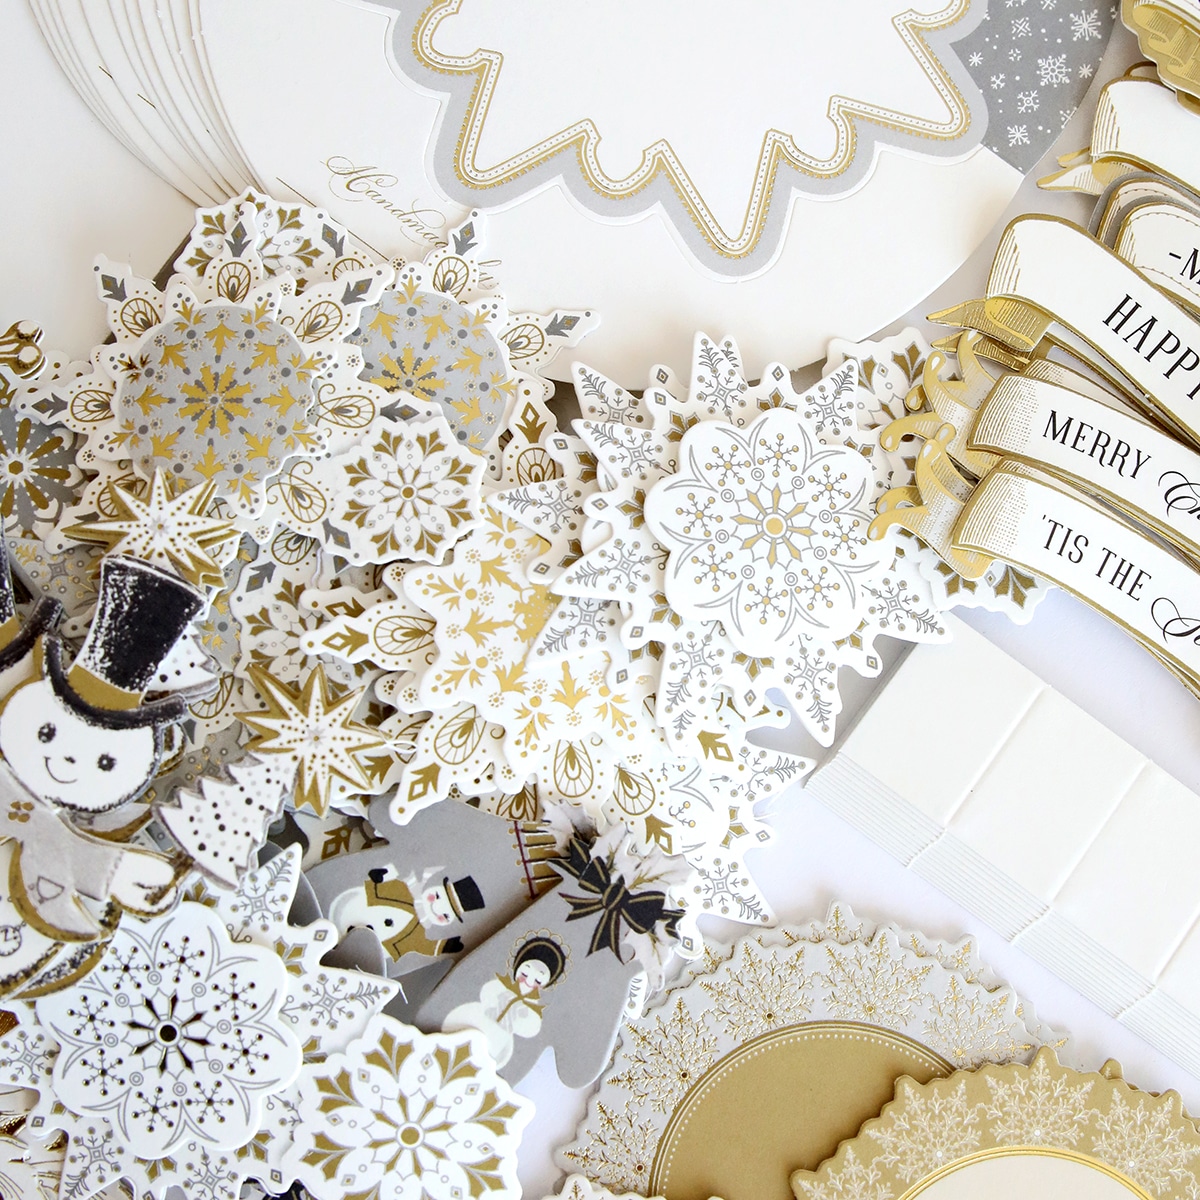 A collection of gold and white snowflakes.